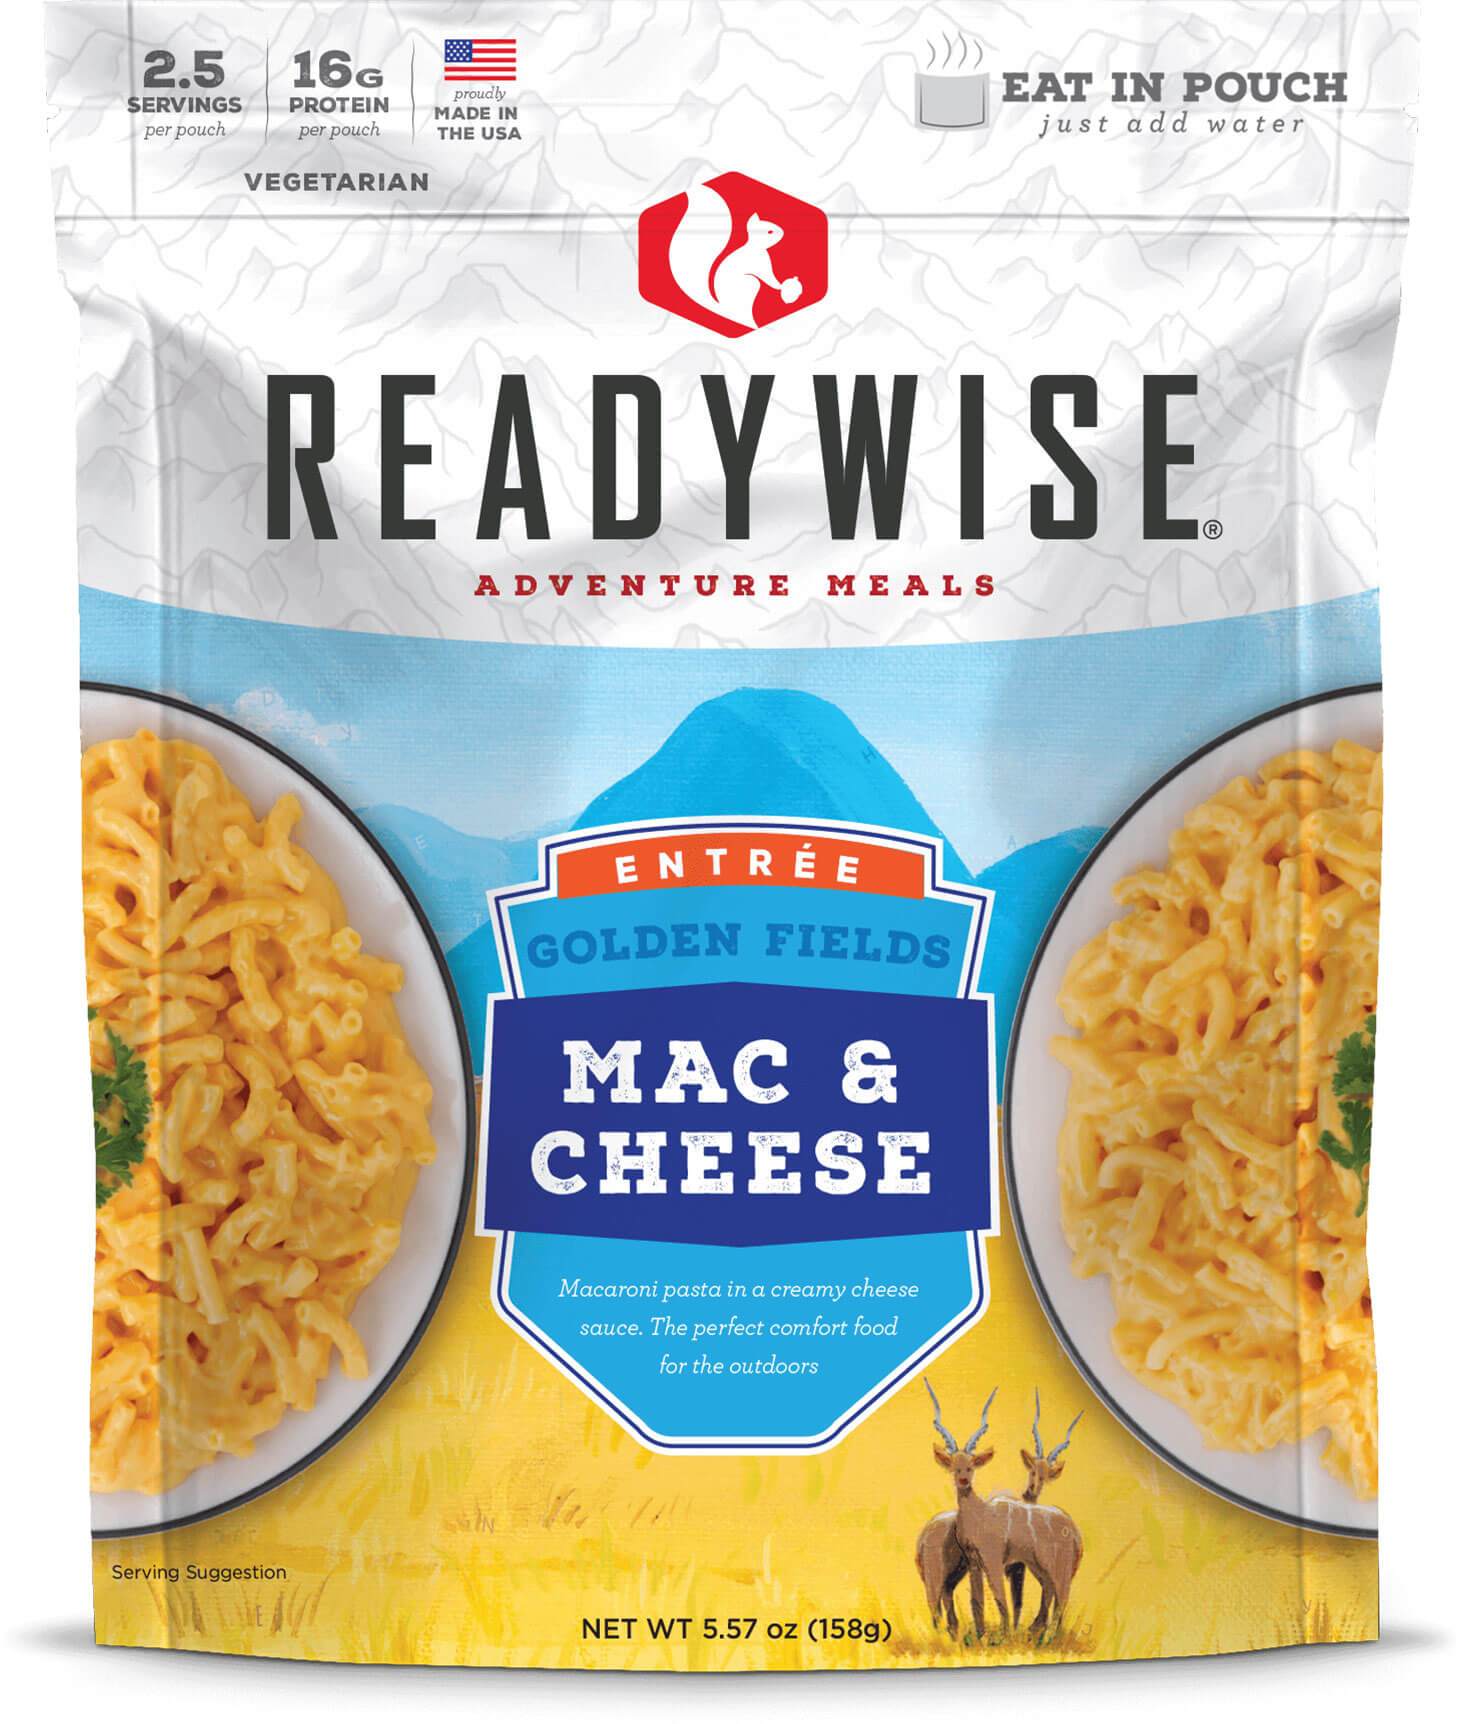 Readywise Adventure Meals Golden Fields Mac & Cheese mac and cheese MRE Macaroni Camping recipe food hiking